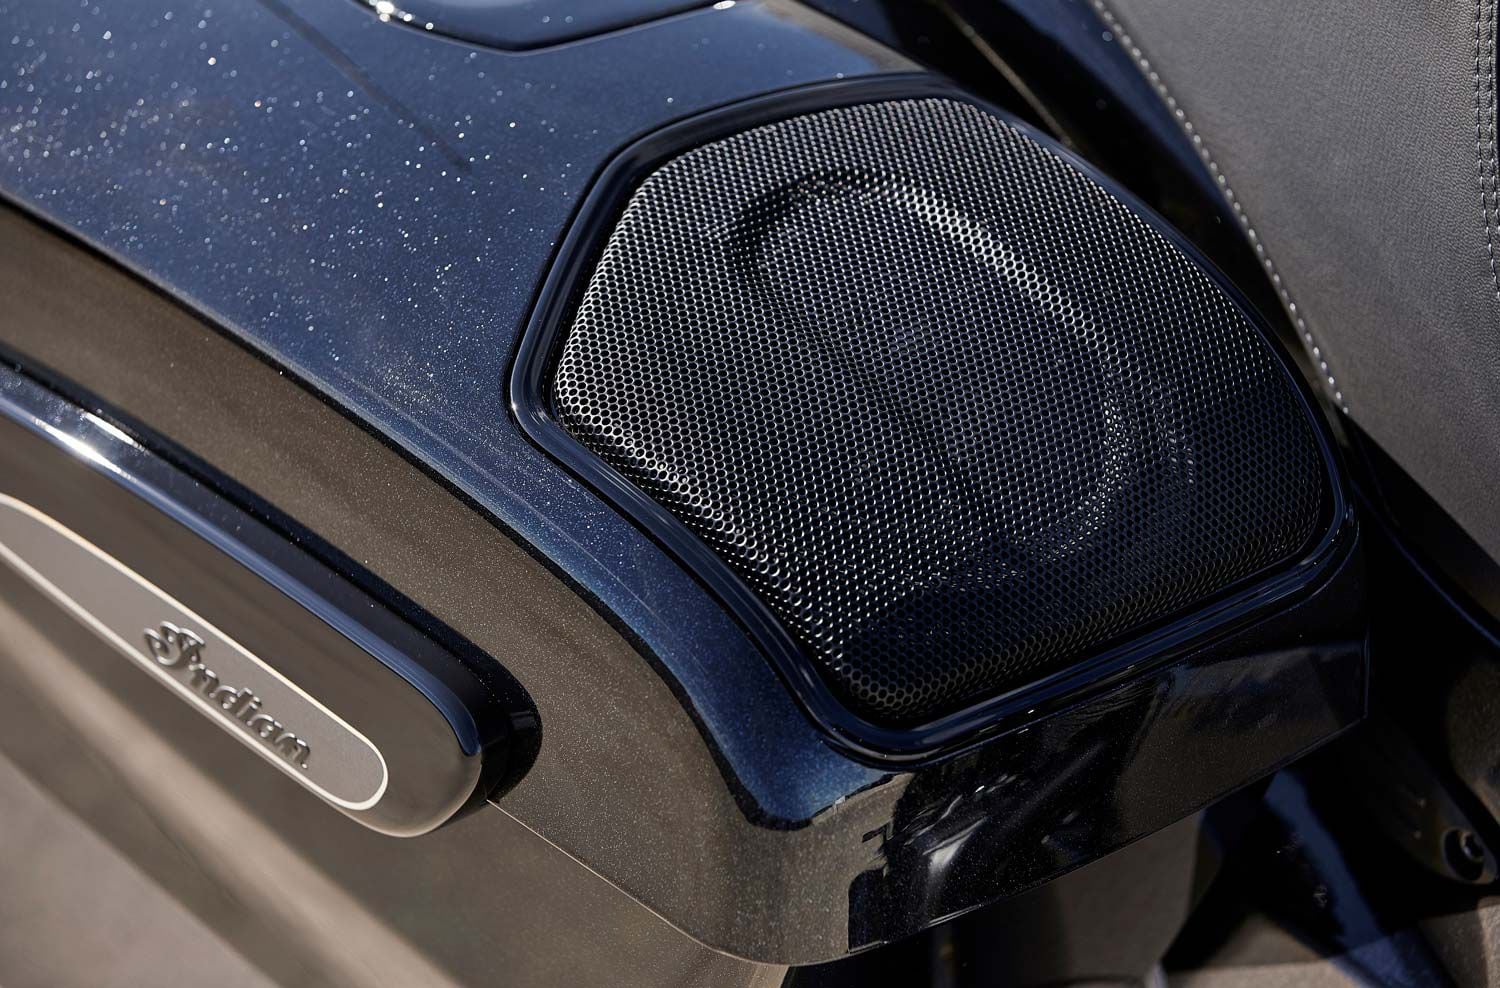 Standard 400-watt audio system includes integrated speakers in fairing and saddlebags.